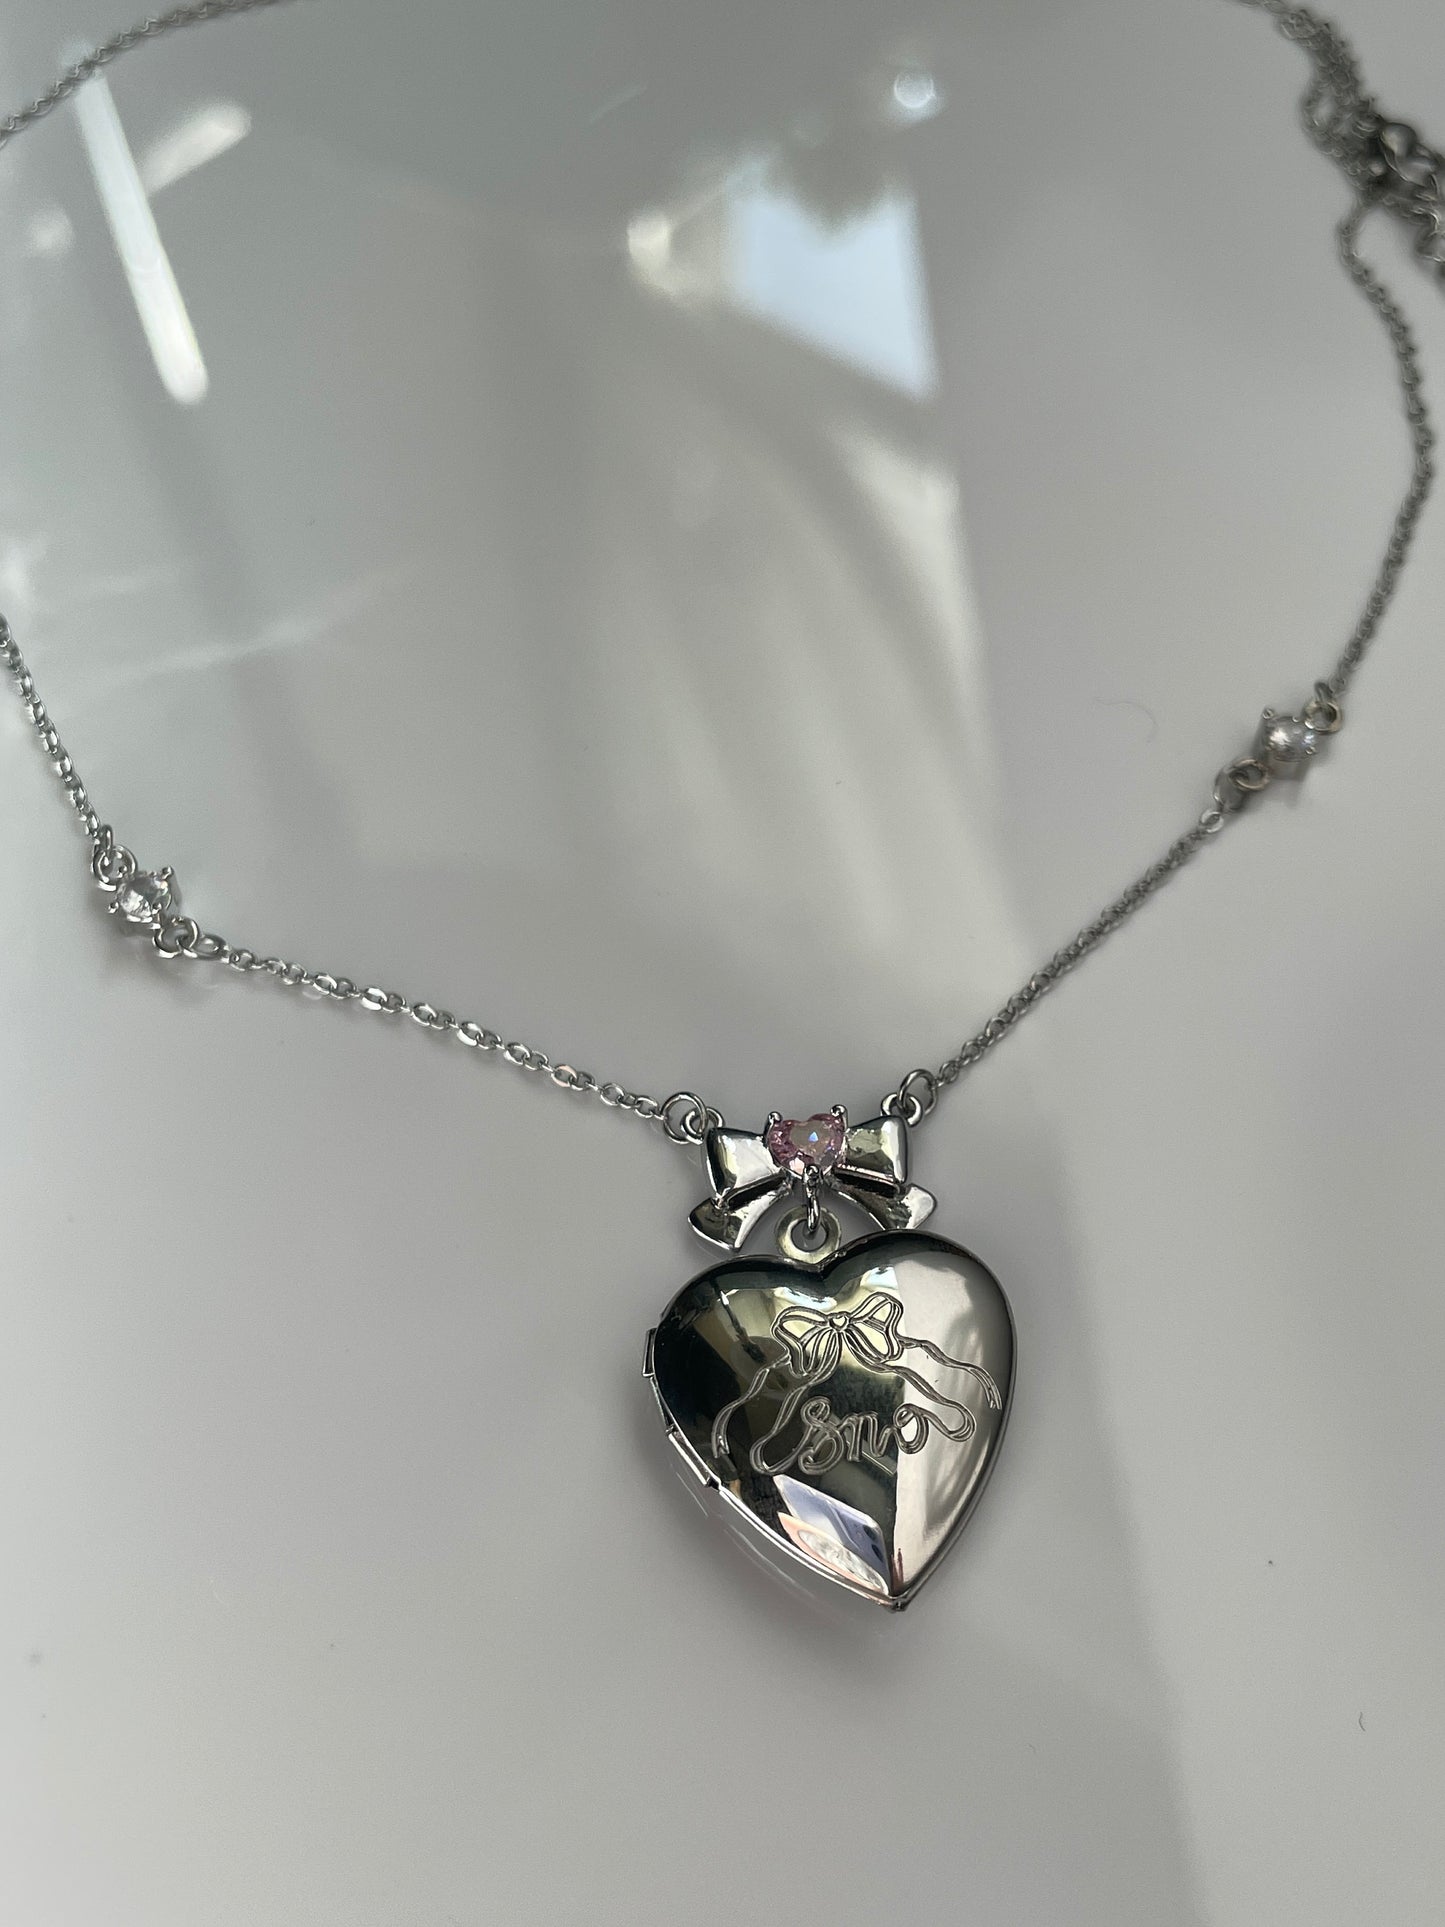 Coquette Bow Heart Locket Necklace Y2k Bow Choker Fairy Grunge Ballet Core Priscilla necklace indie jewelry Valentine's Day Gift for Her